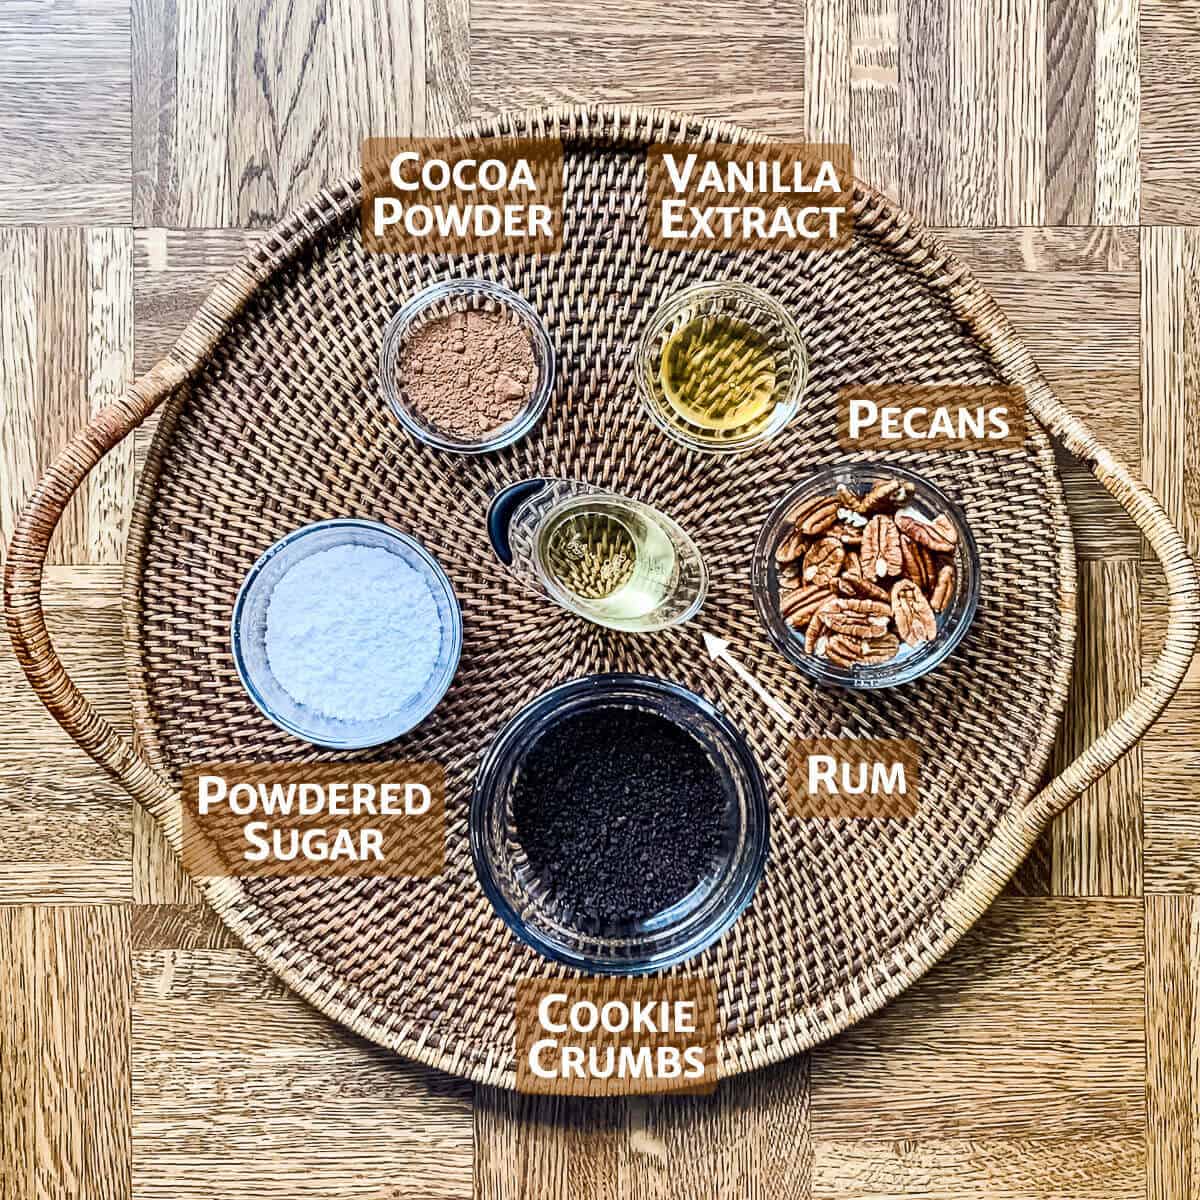 Rum Ball ingredients in bowls on a wooden tray.